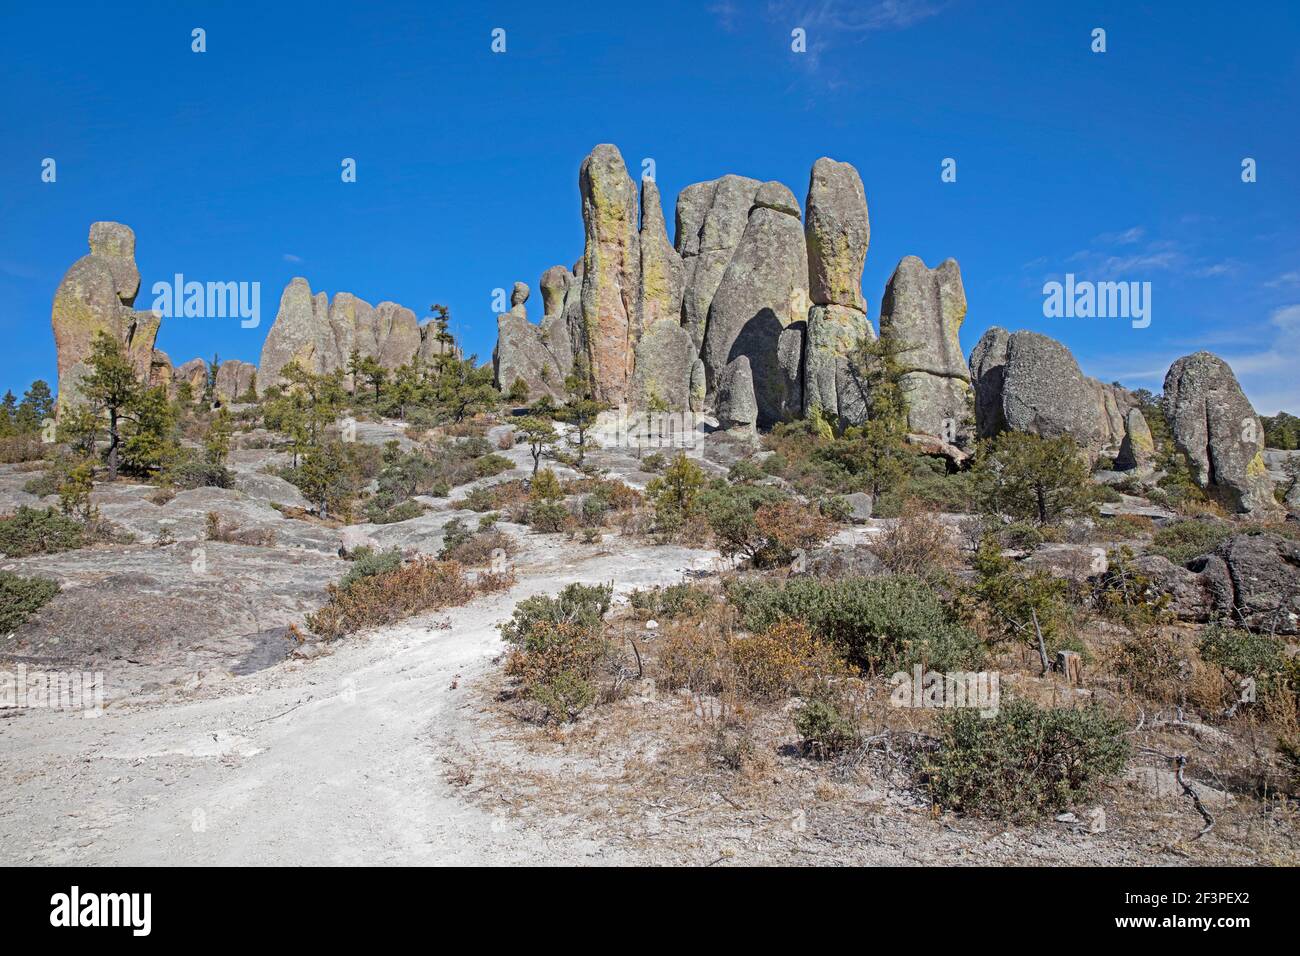 Elongated rock formations in the Valley of the Monks / Valle de los Monjes / Bisabirachi near Creel in Alta Sierra Tarahumara, Chihuahua, Mexico Stock Photo